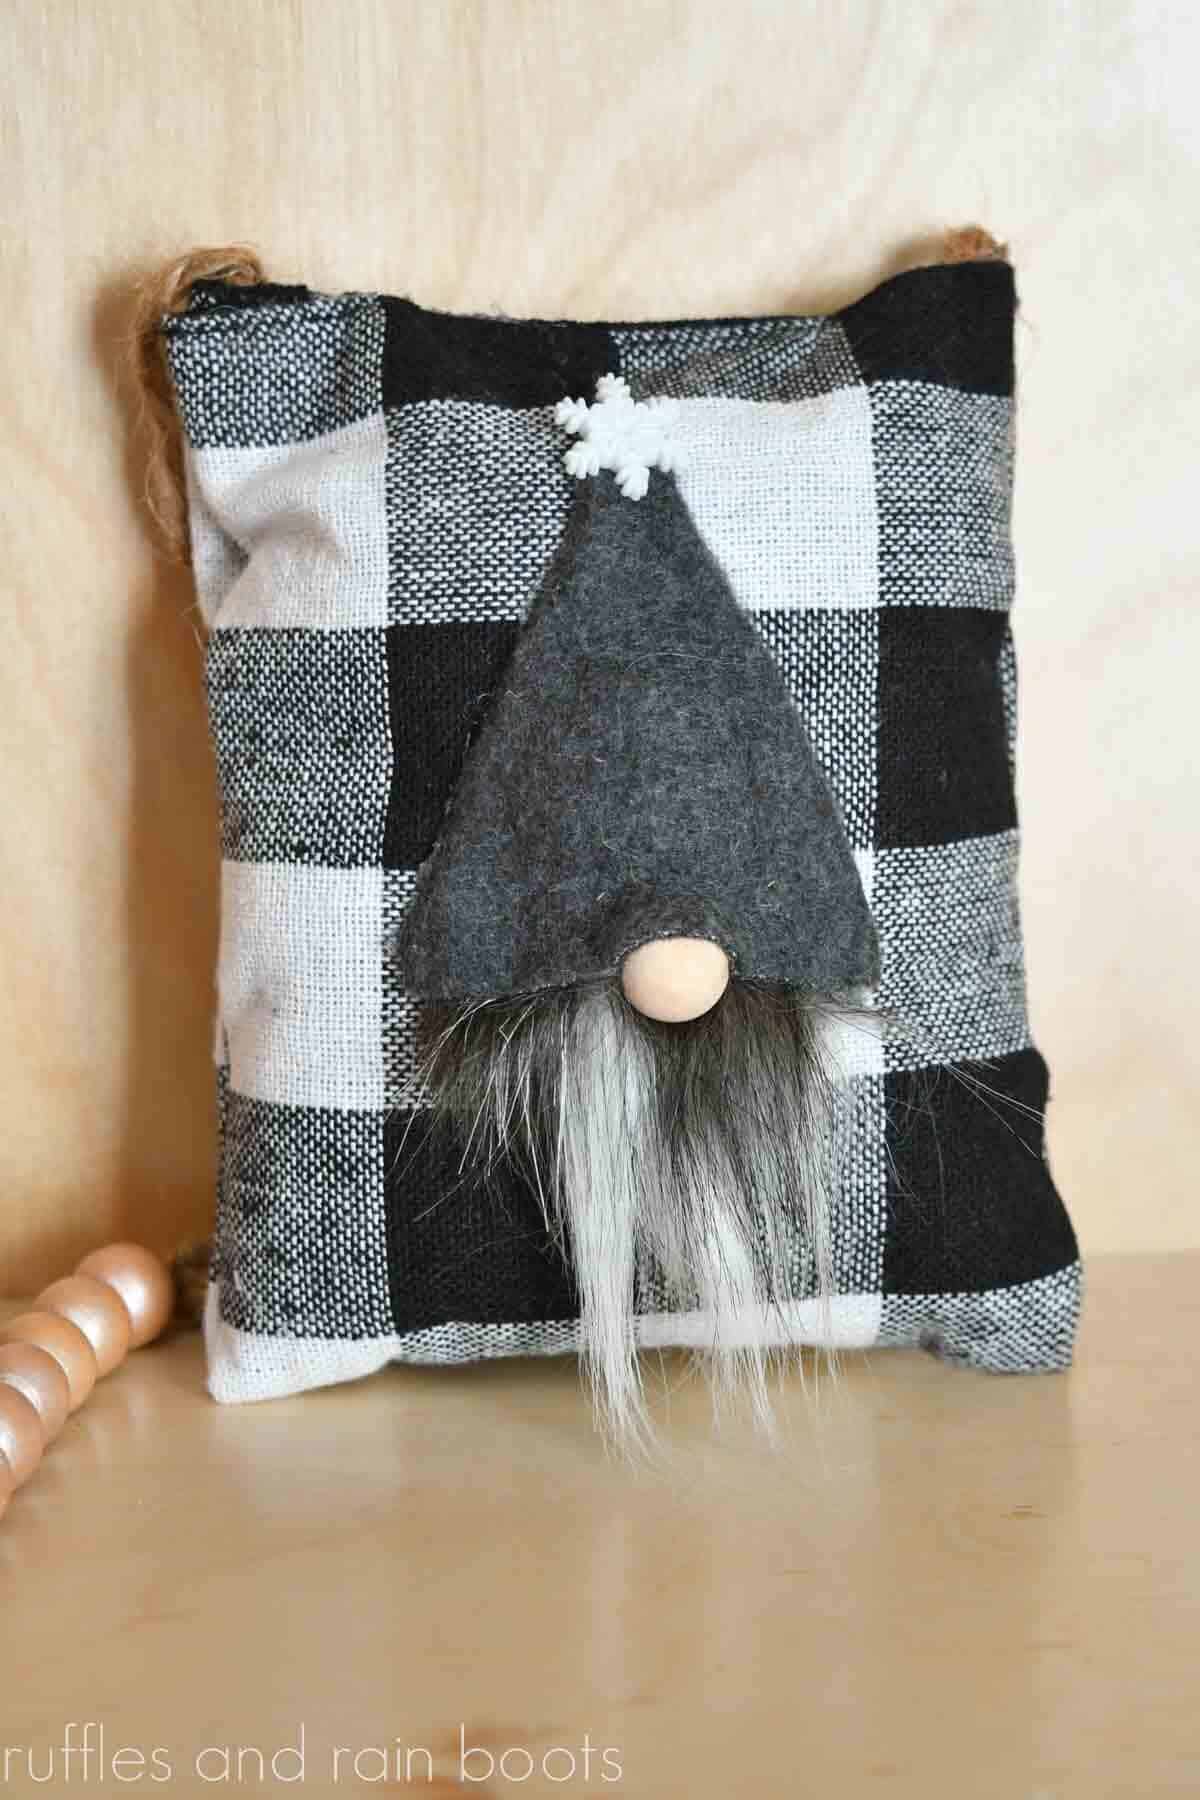 Vertical image of a gray hat gnome tiered tray pillow with a snowflake in front of a light colored wood background.